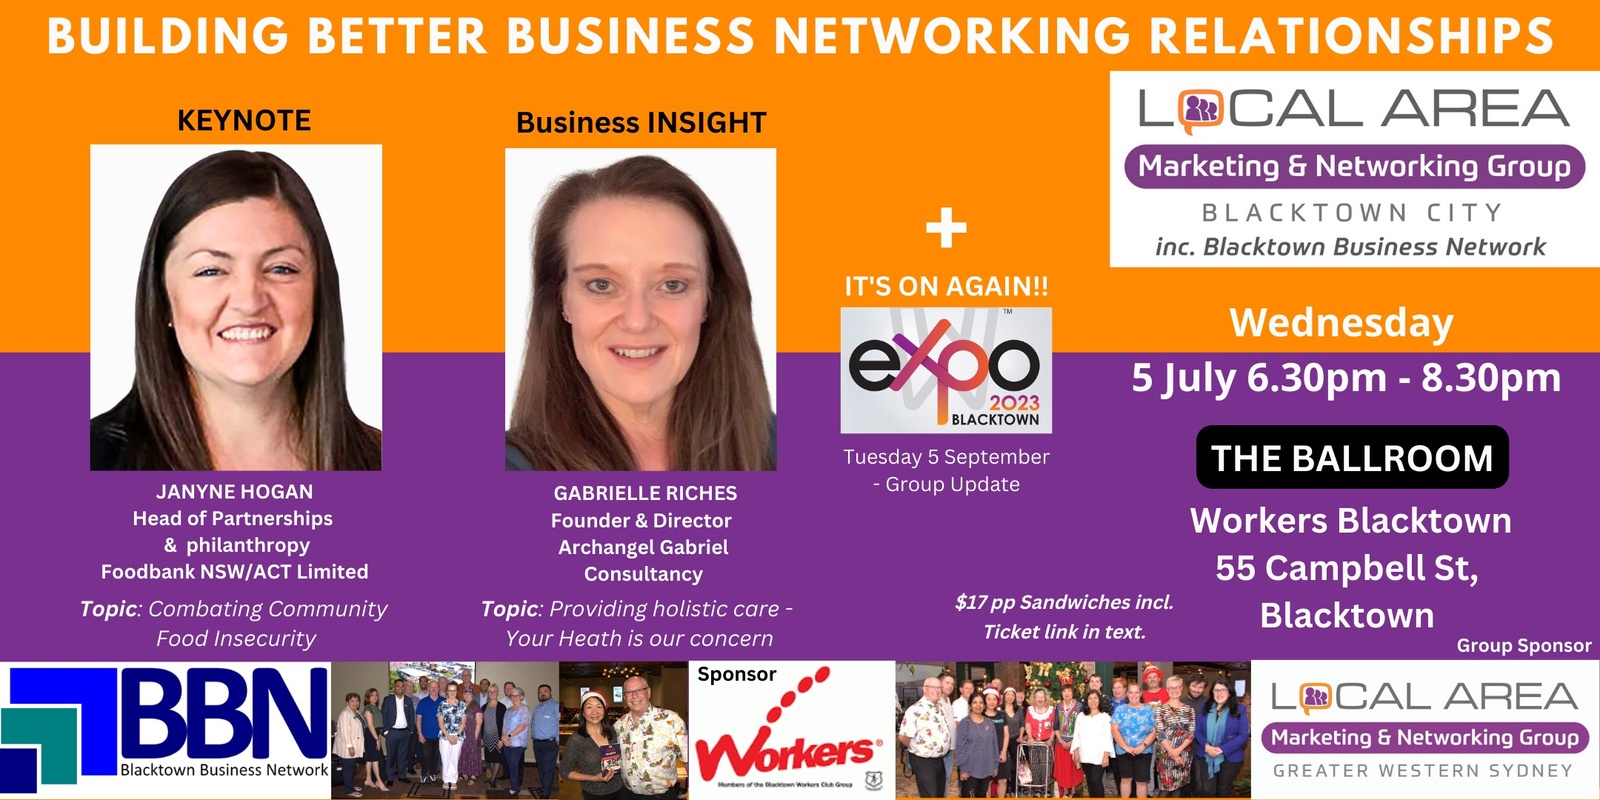 Banner image for July - Blacktown City Networking (BBN) - Building Better Business Relationships